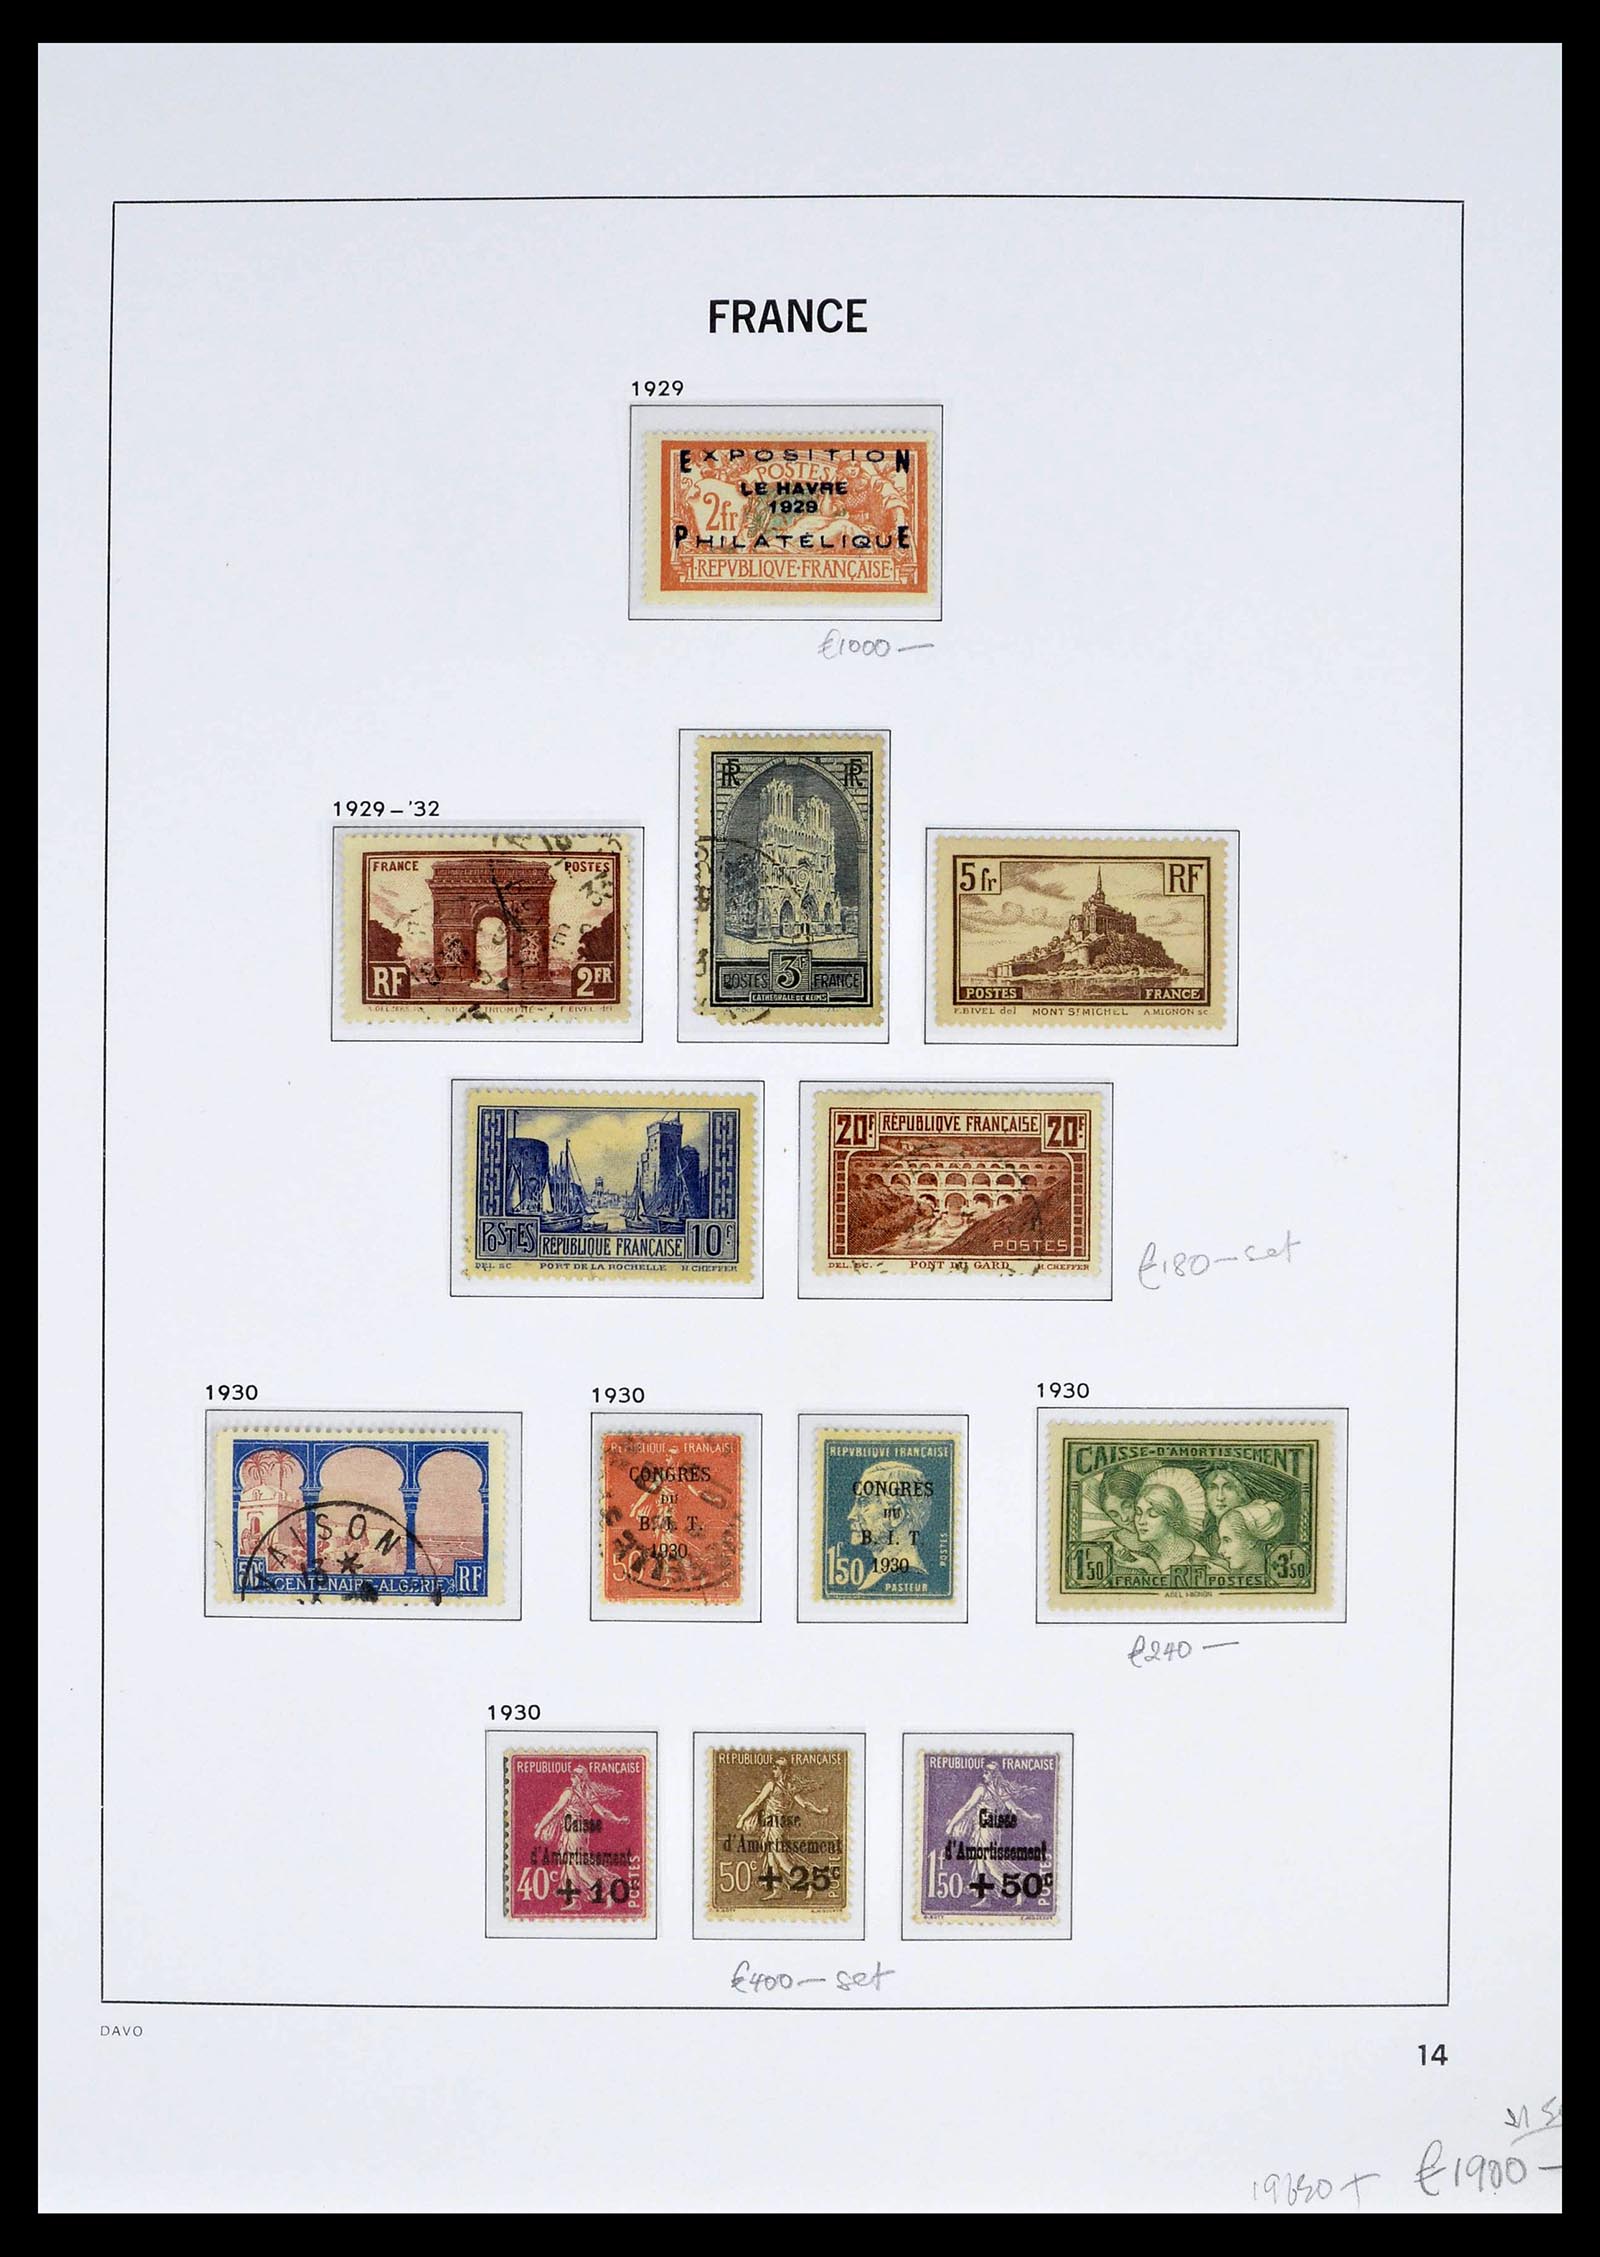 39335 0029 - Stamp collection 39335 France 1849-1969.